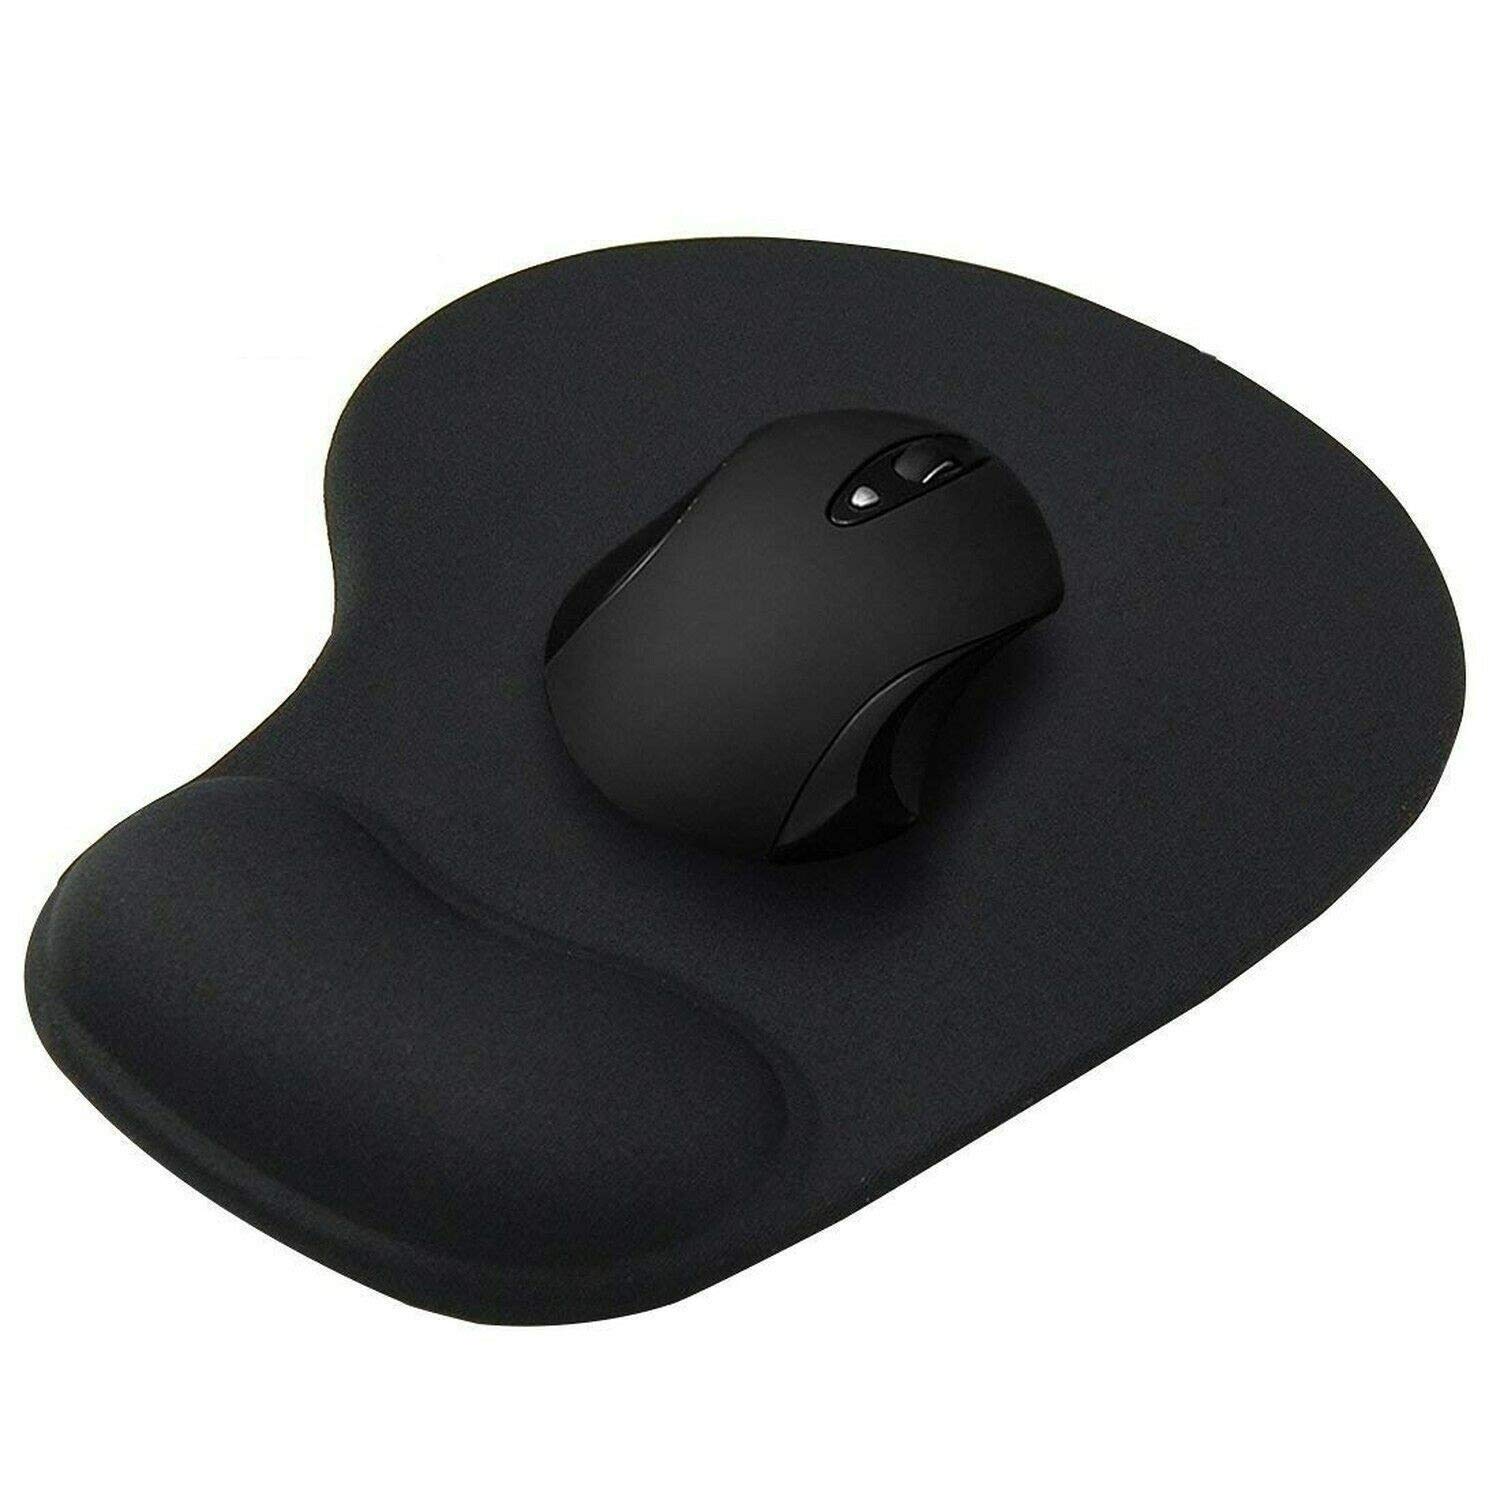 Mouse Pad with Wrist Rest Support - RightSource